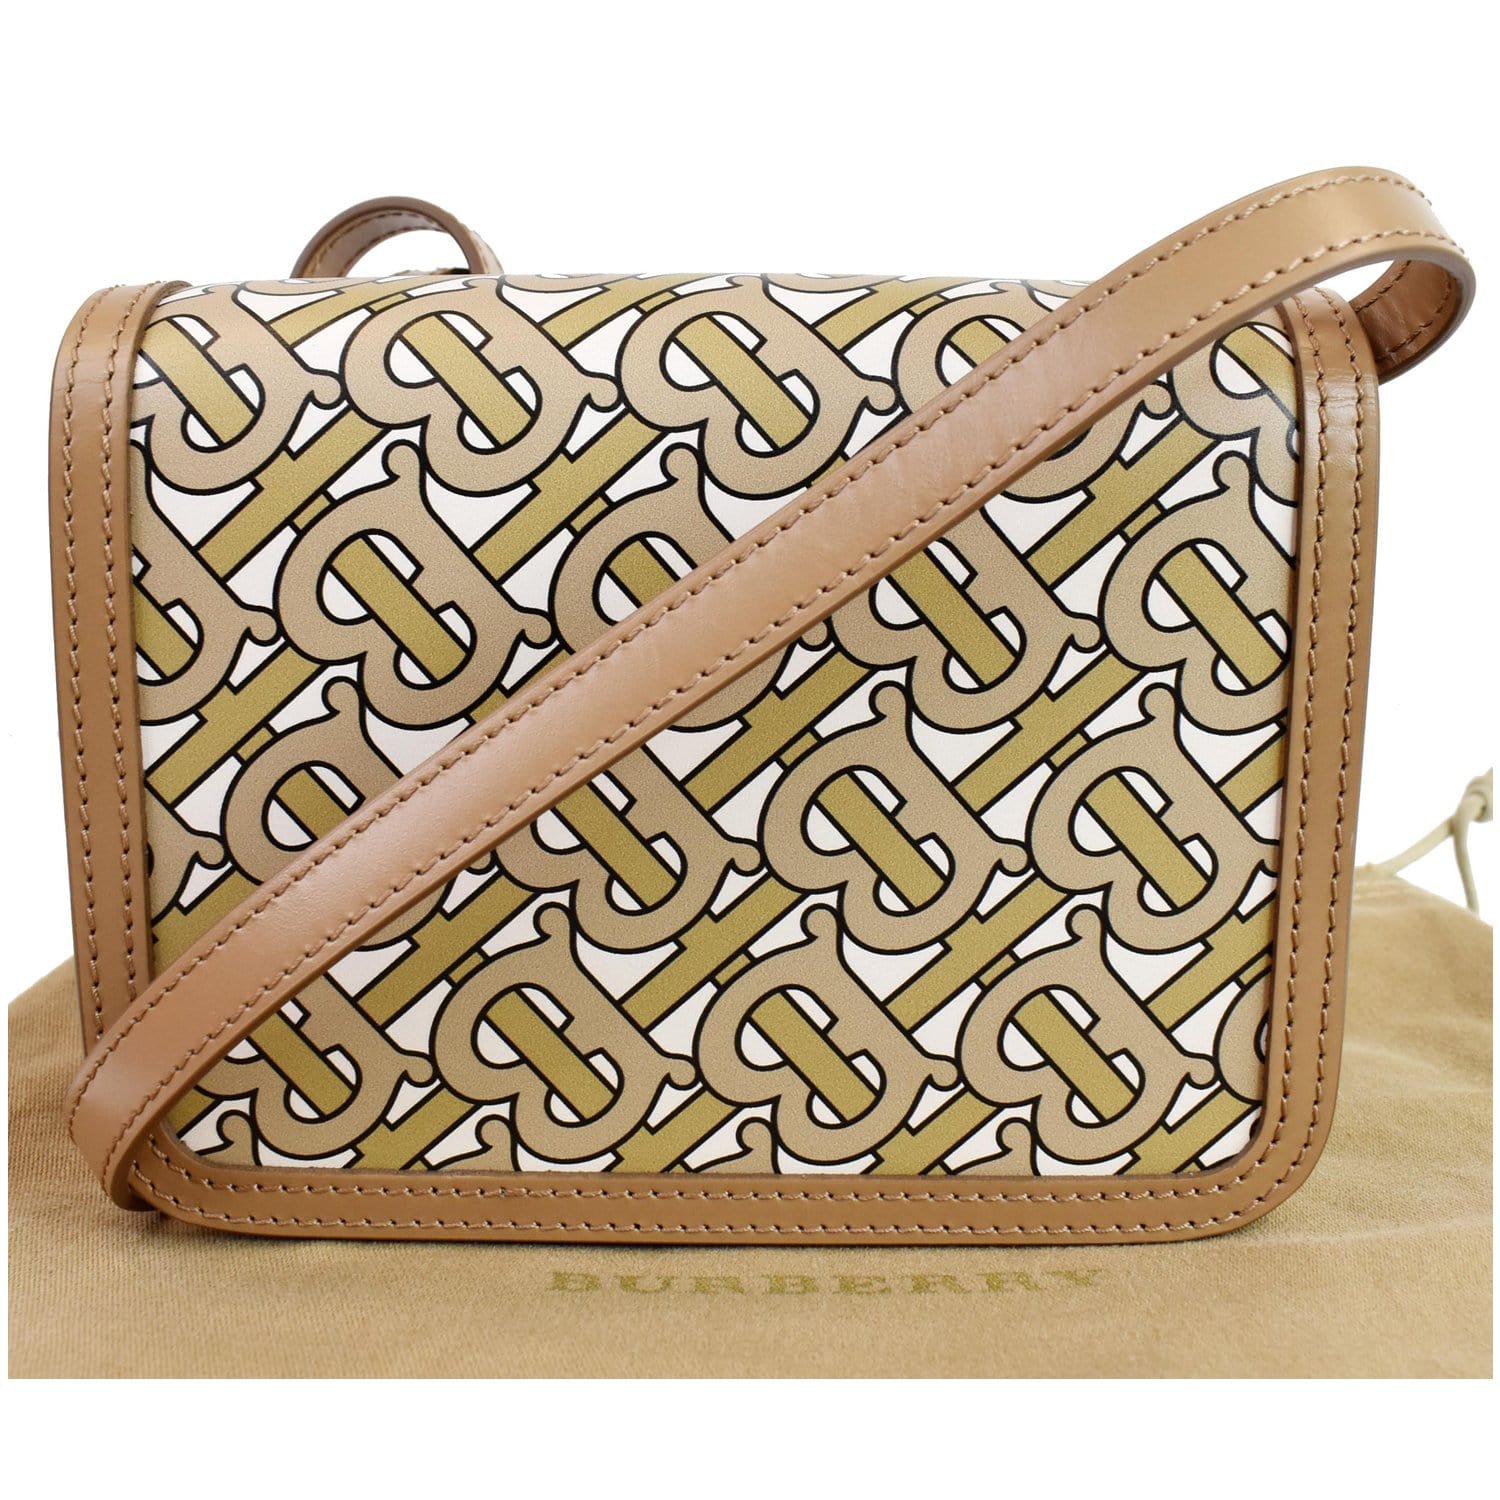 BURBERRY: TB bag in canvas and leather - Beige  Burberry mini bag 8070574  online at